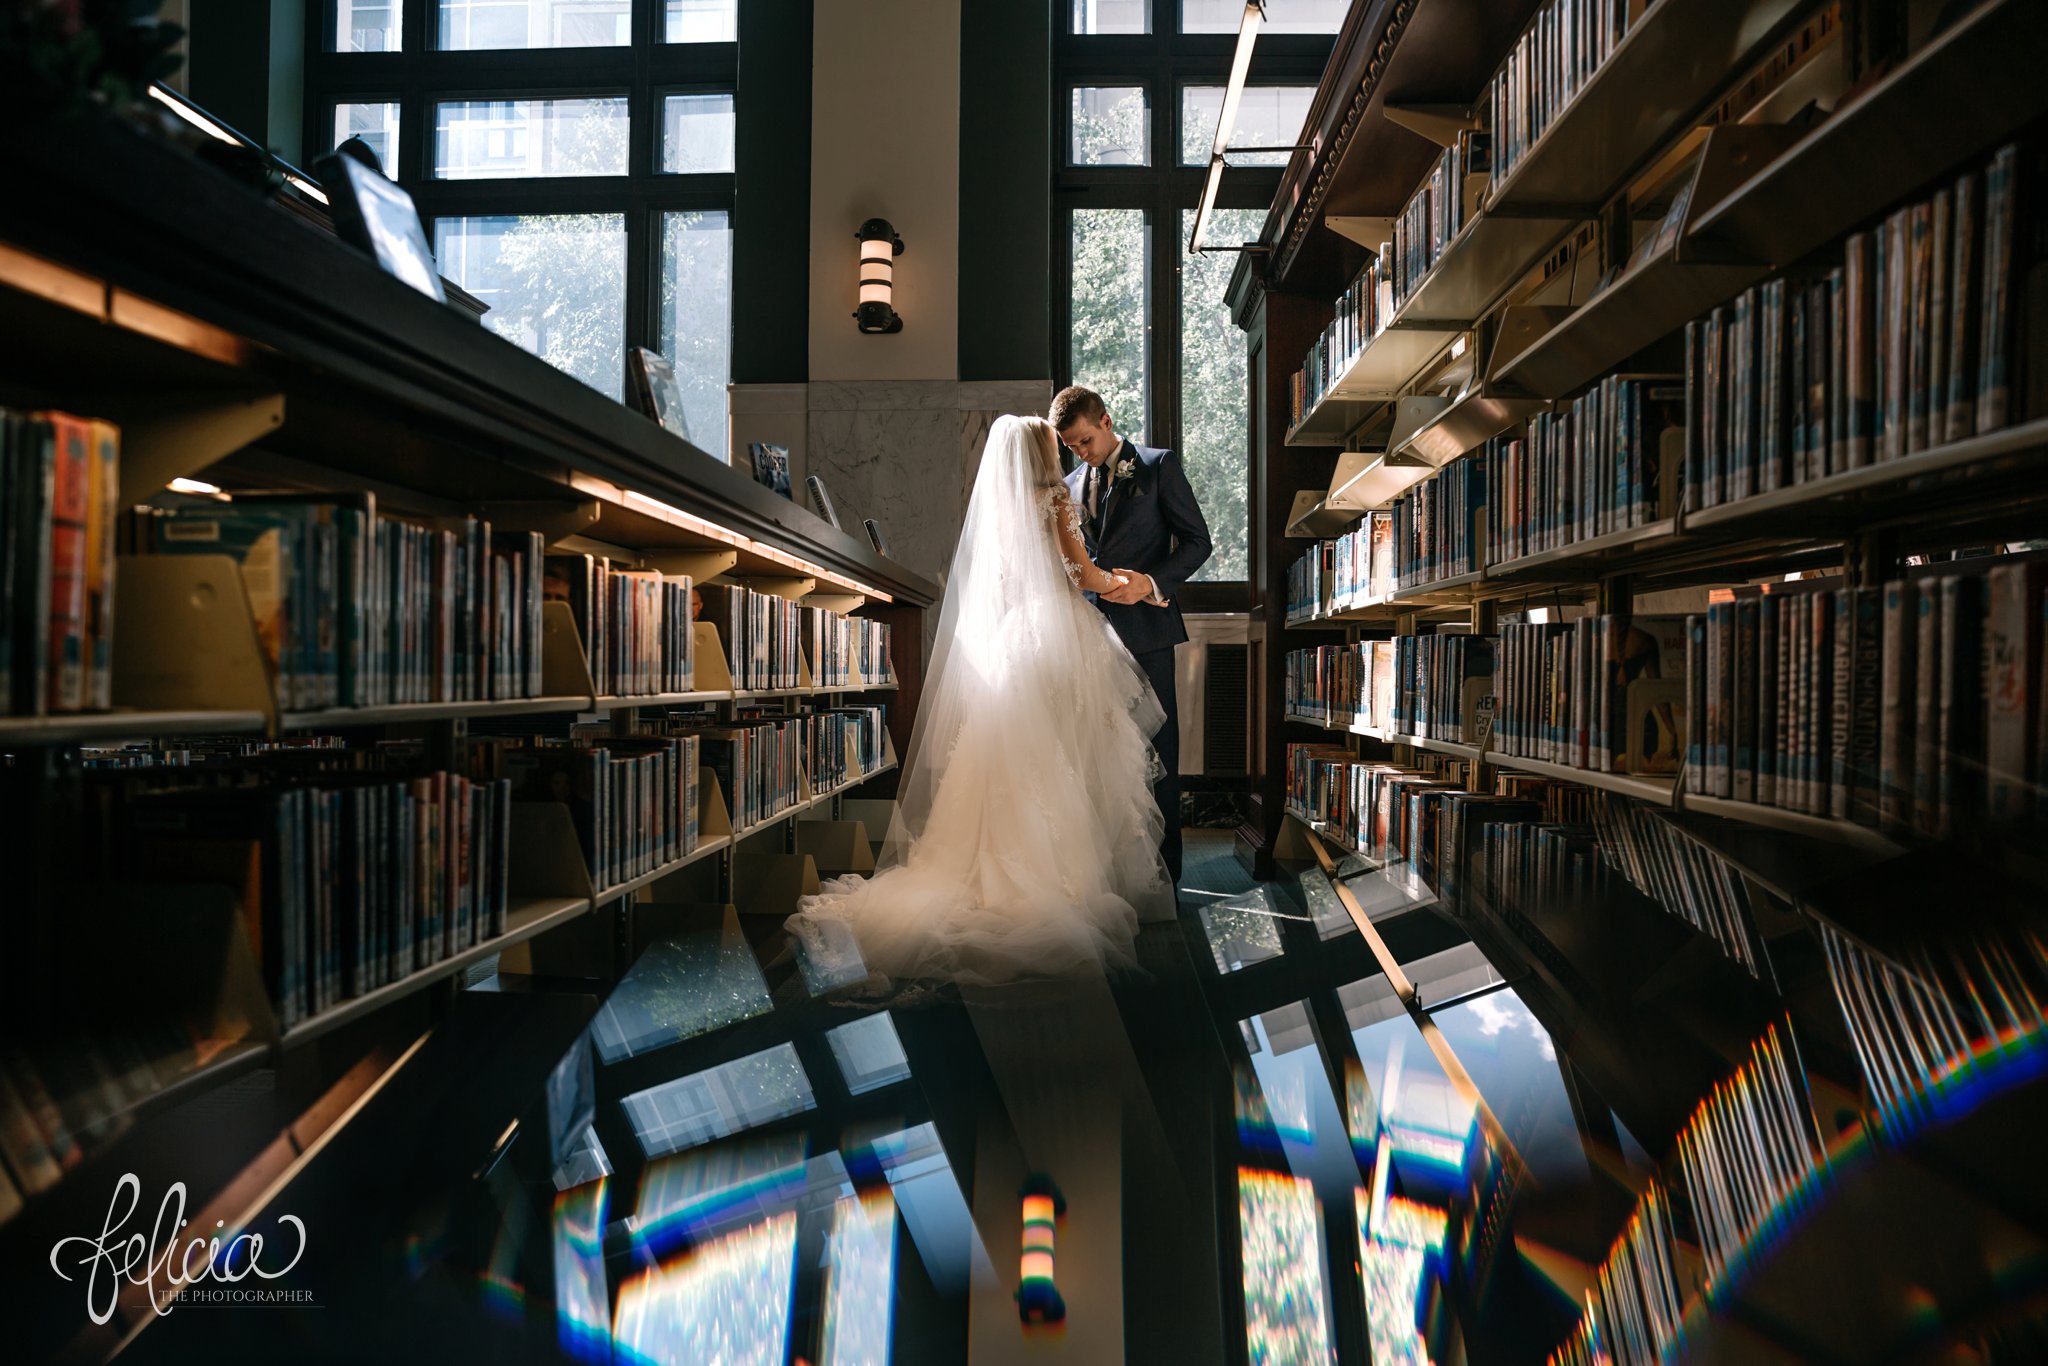 images by feliciathephotographer.com | wedding photographer | kansas city | redemptorist | classic | whimsical | romantic | reflection | library | nerdy | in love | joy | sincere | tule gown | belle vogue | lace long sleeve | 